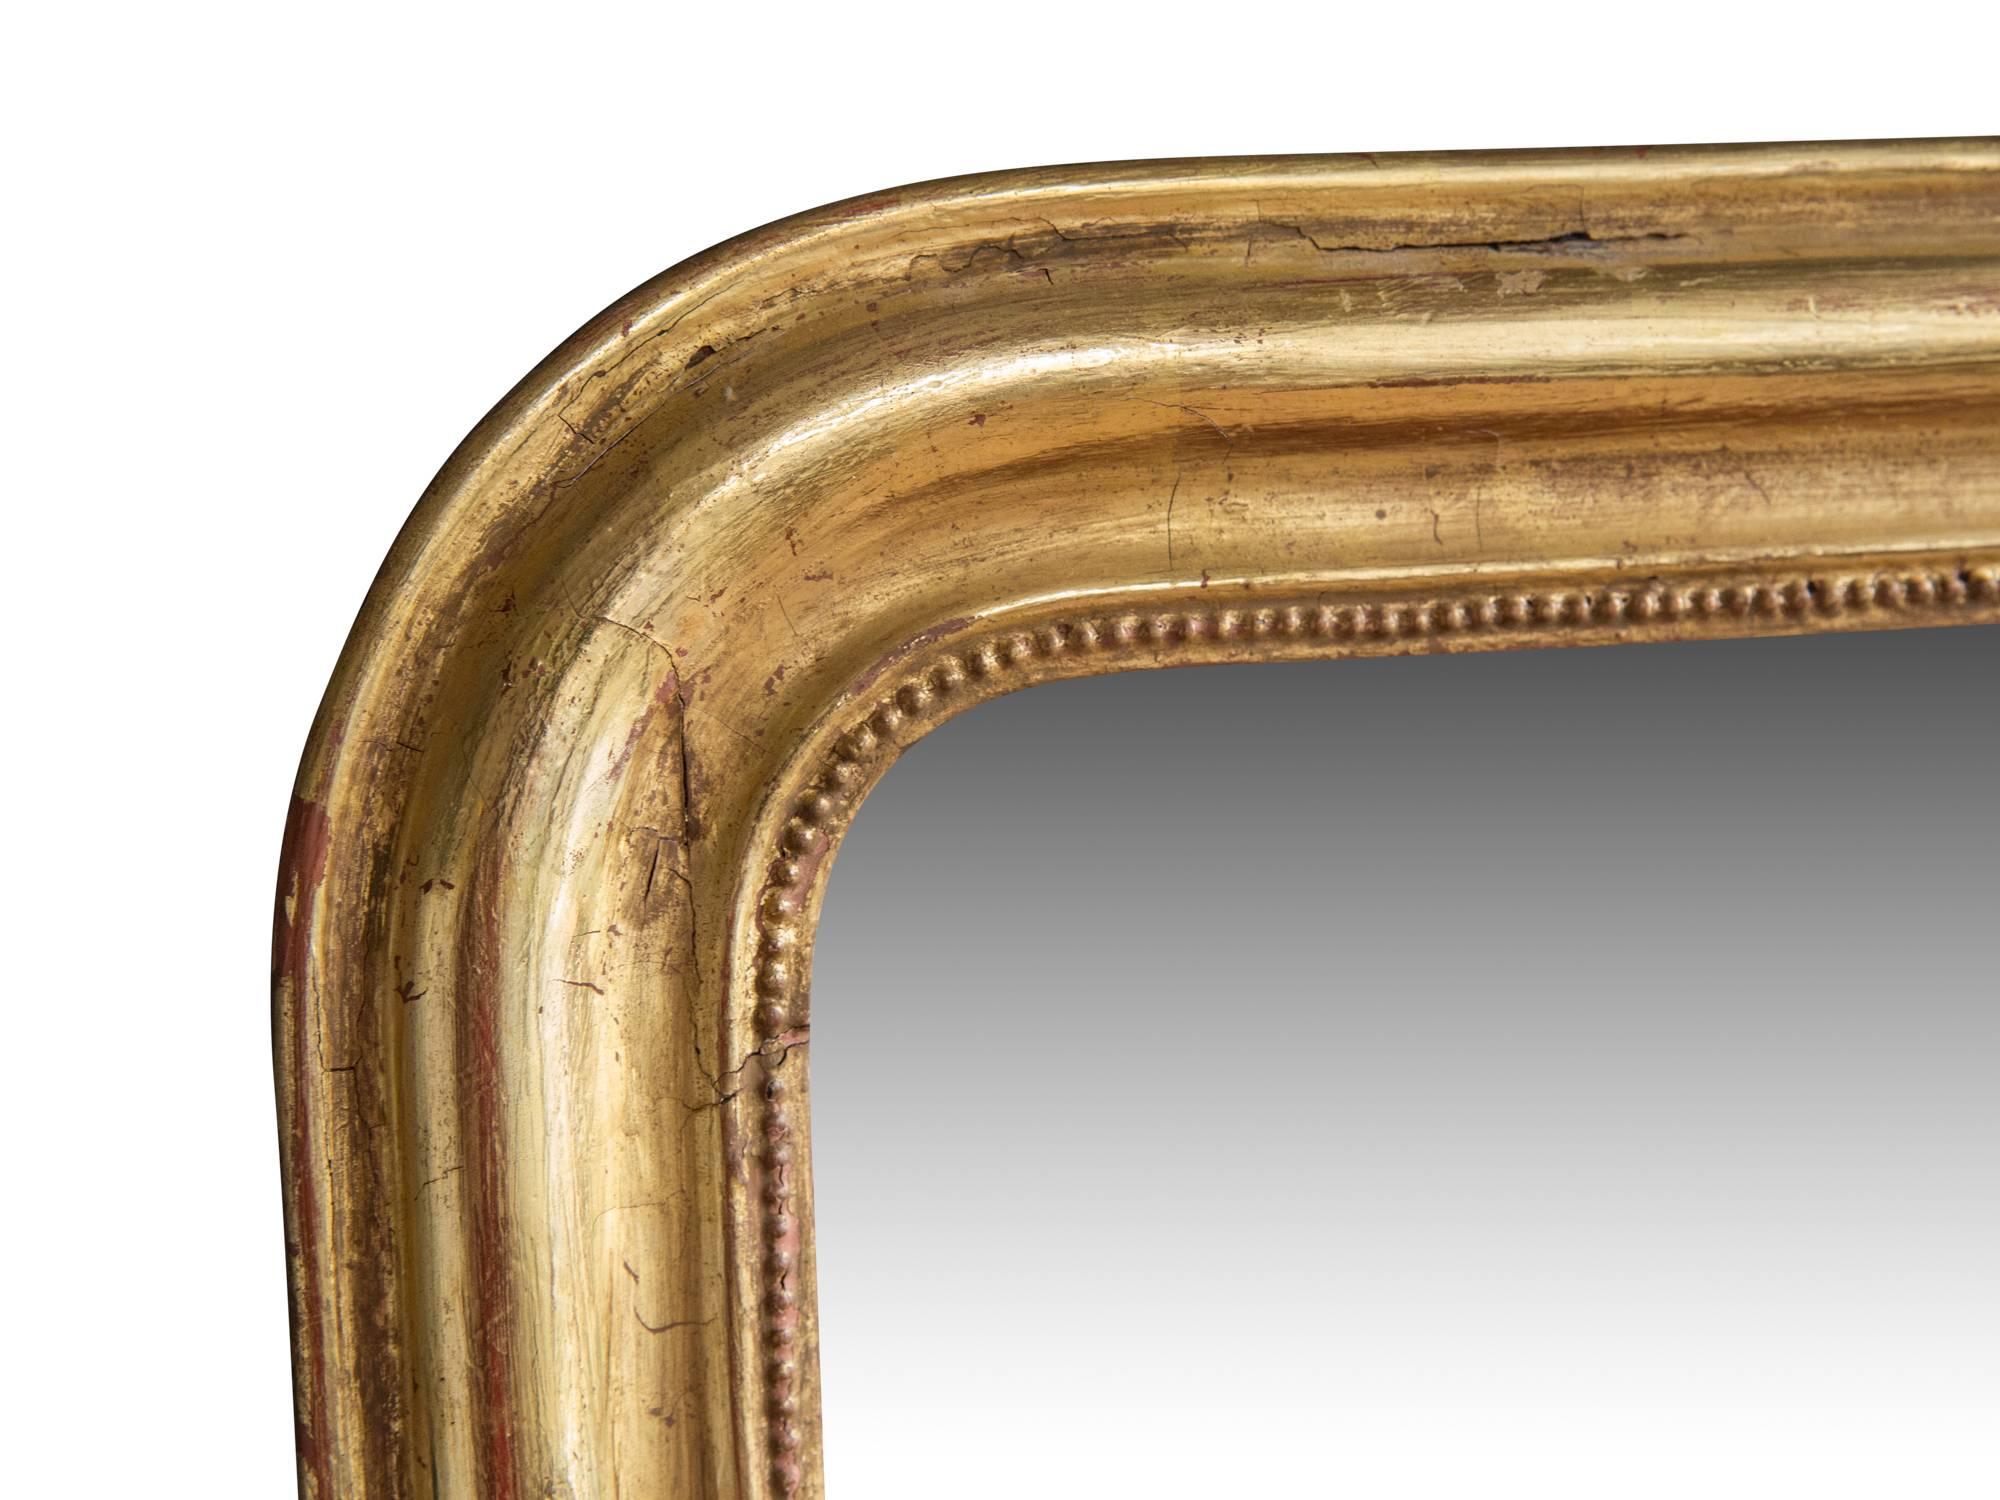 A French Louis Philippe style rectangular wall mirror, ca. 19th century. Featuring a gilt wood frame with soft, rounded edges, interior beaded detail, and typical arched upper corners. Retains antique mercury glass mirror and original wood back. 

A